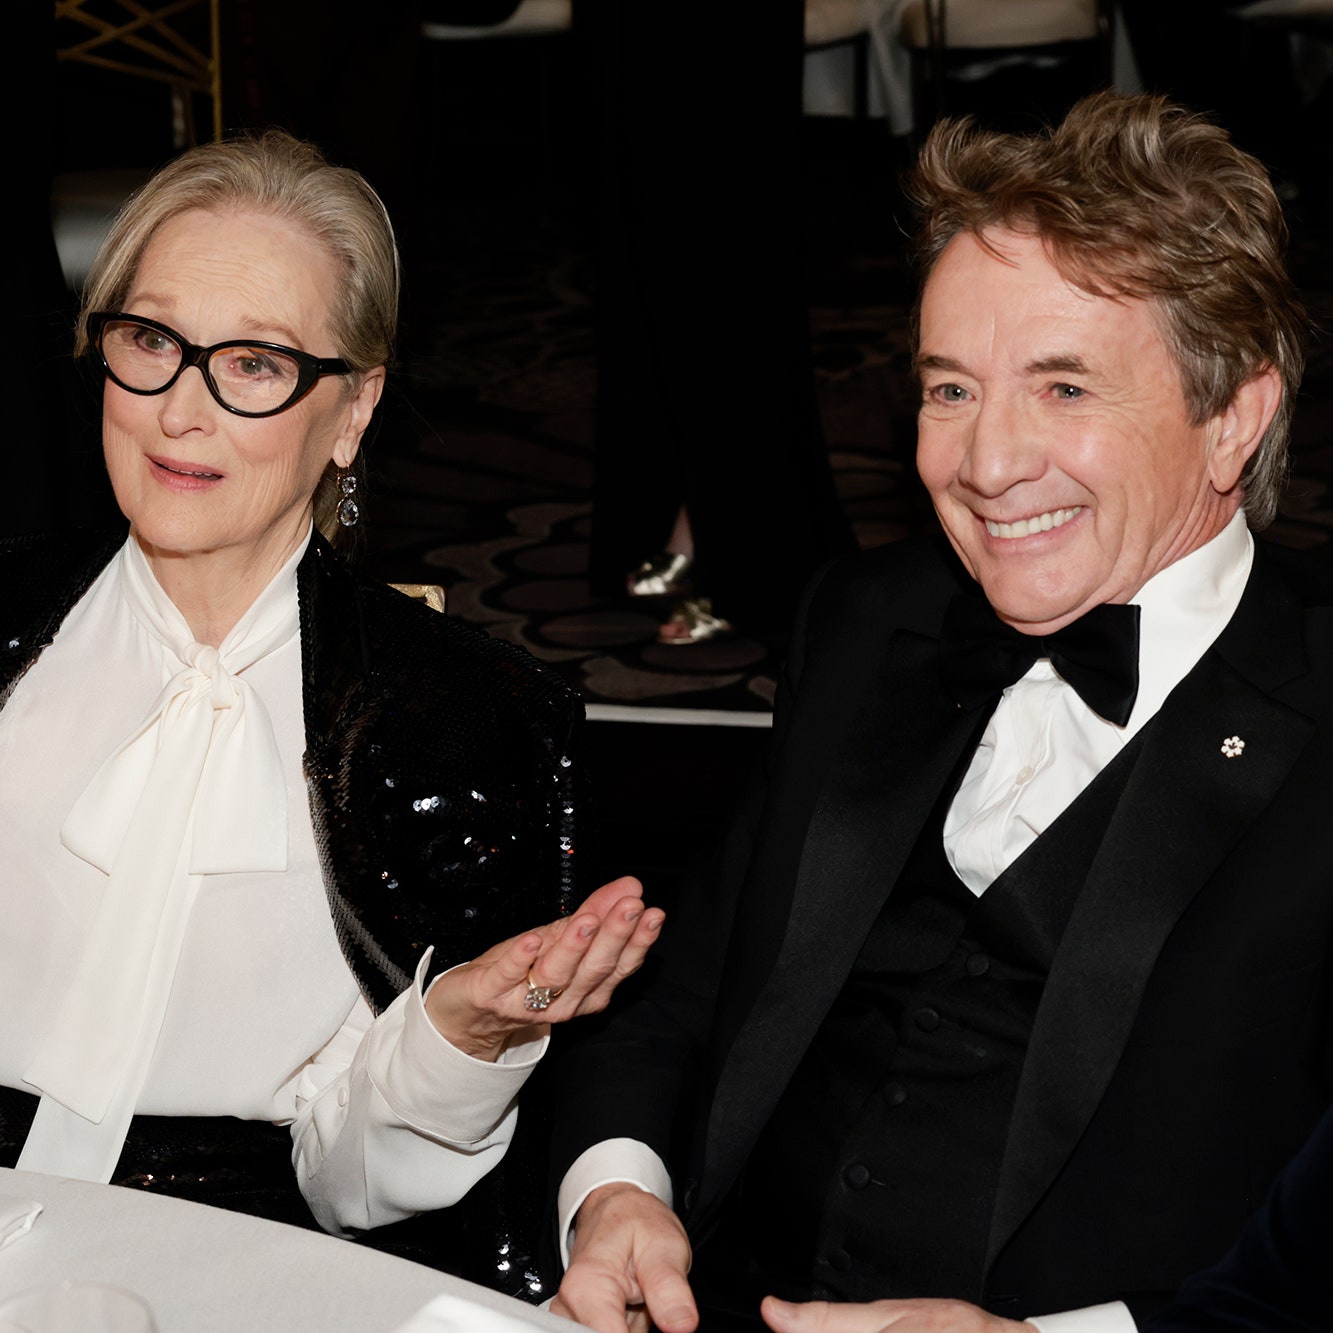 Meryl Streep and Martin Short Go Out to Dinner, Serve Speculation